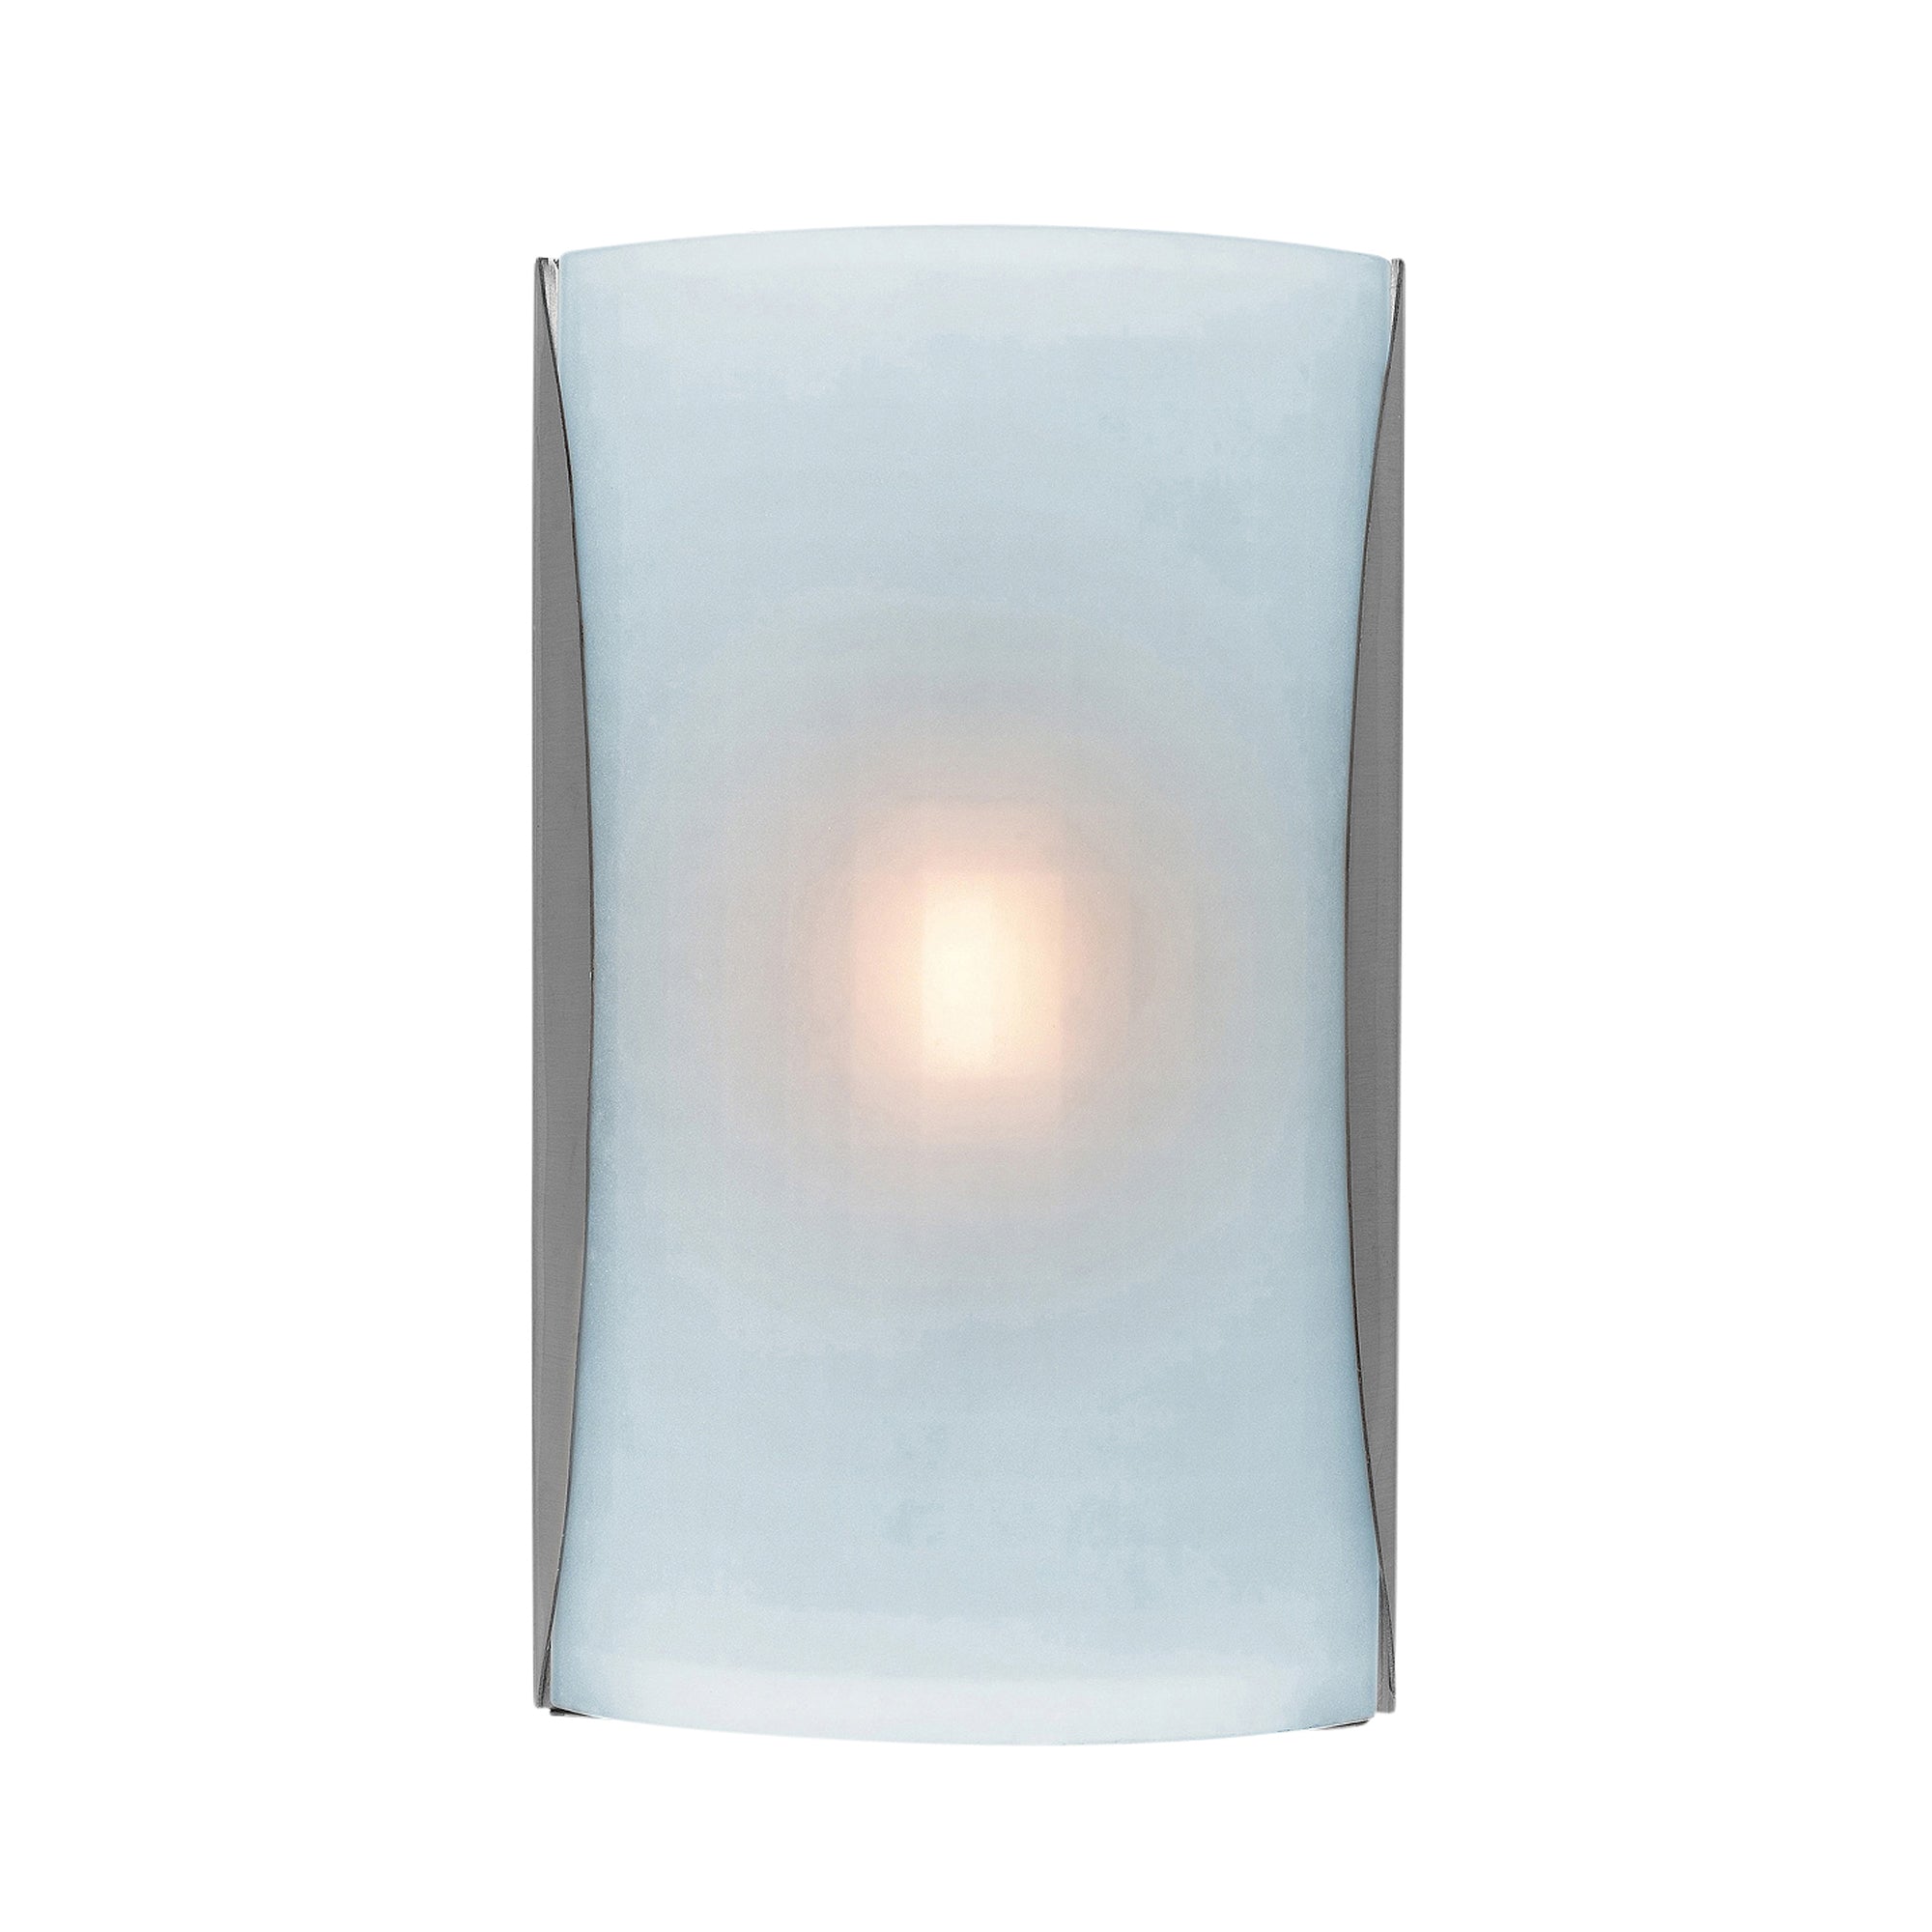 Access Lighting Inc, ACCESS LIGHTING C62050BS ENERGY SMART 9" WALL SCONCE BRUSHED STEEL OPAL GLASS